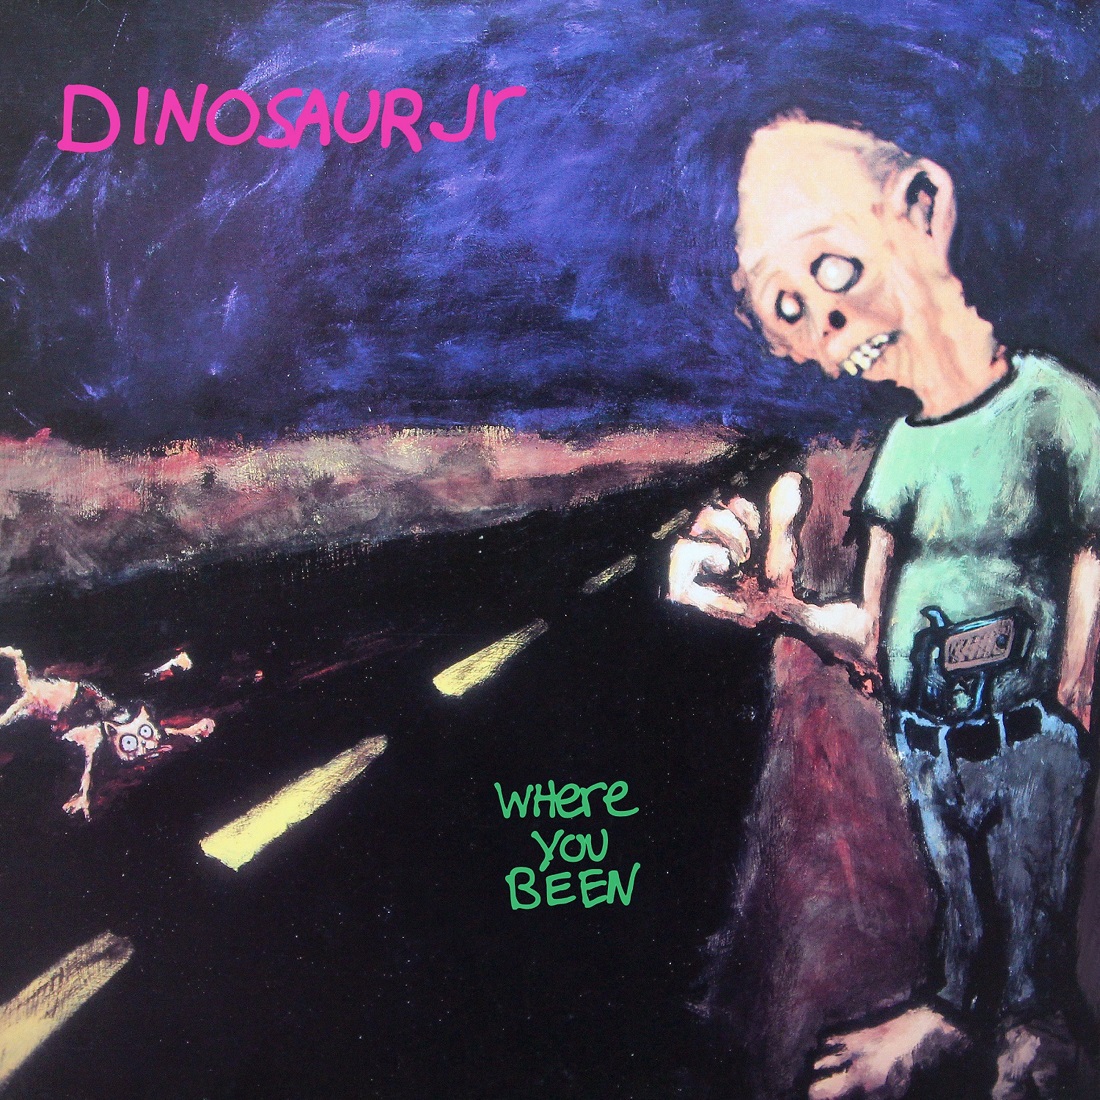 Dinosaur Jr. – Where You Been (Expanded & Remastered) (1993/2019) [FLAC 24bit/44,1kHz]